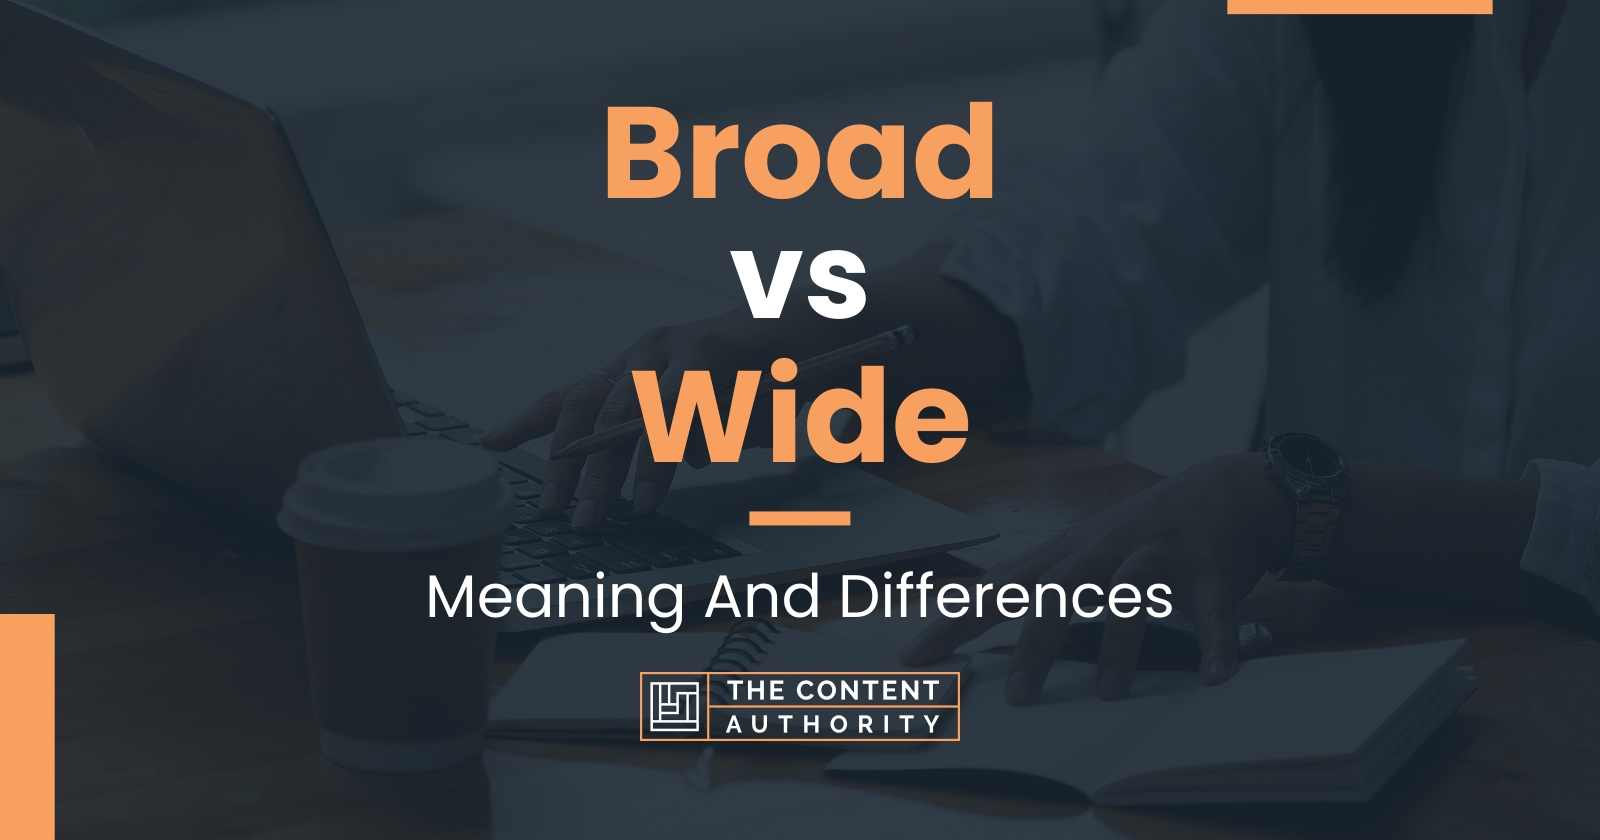 Broad vs Wide: Meaning And Differences